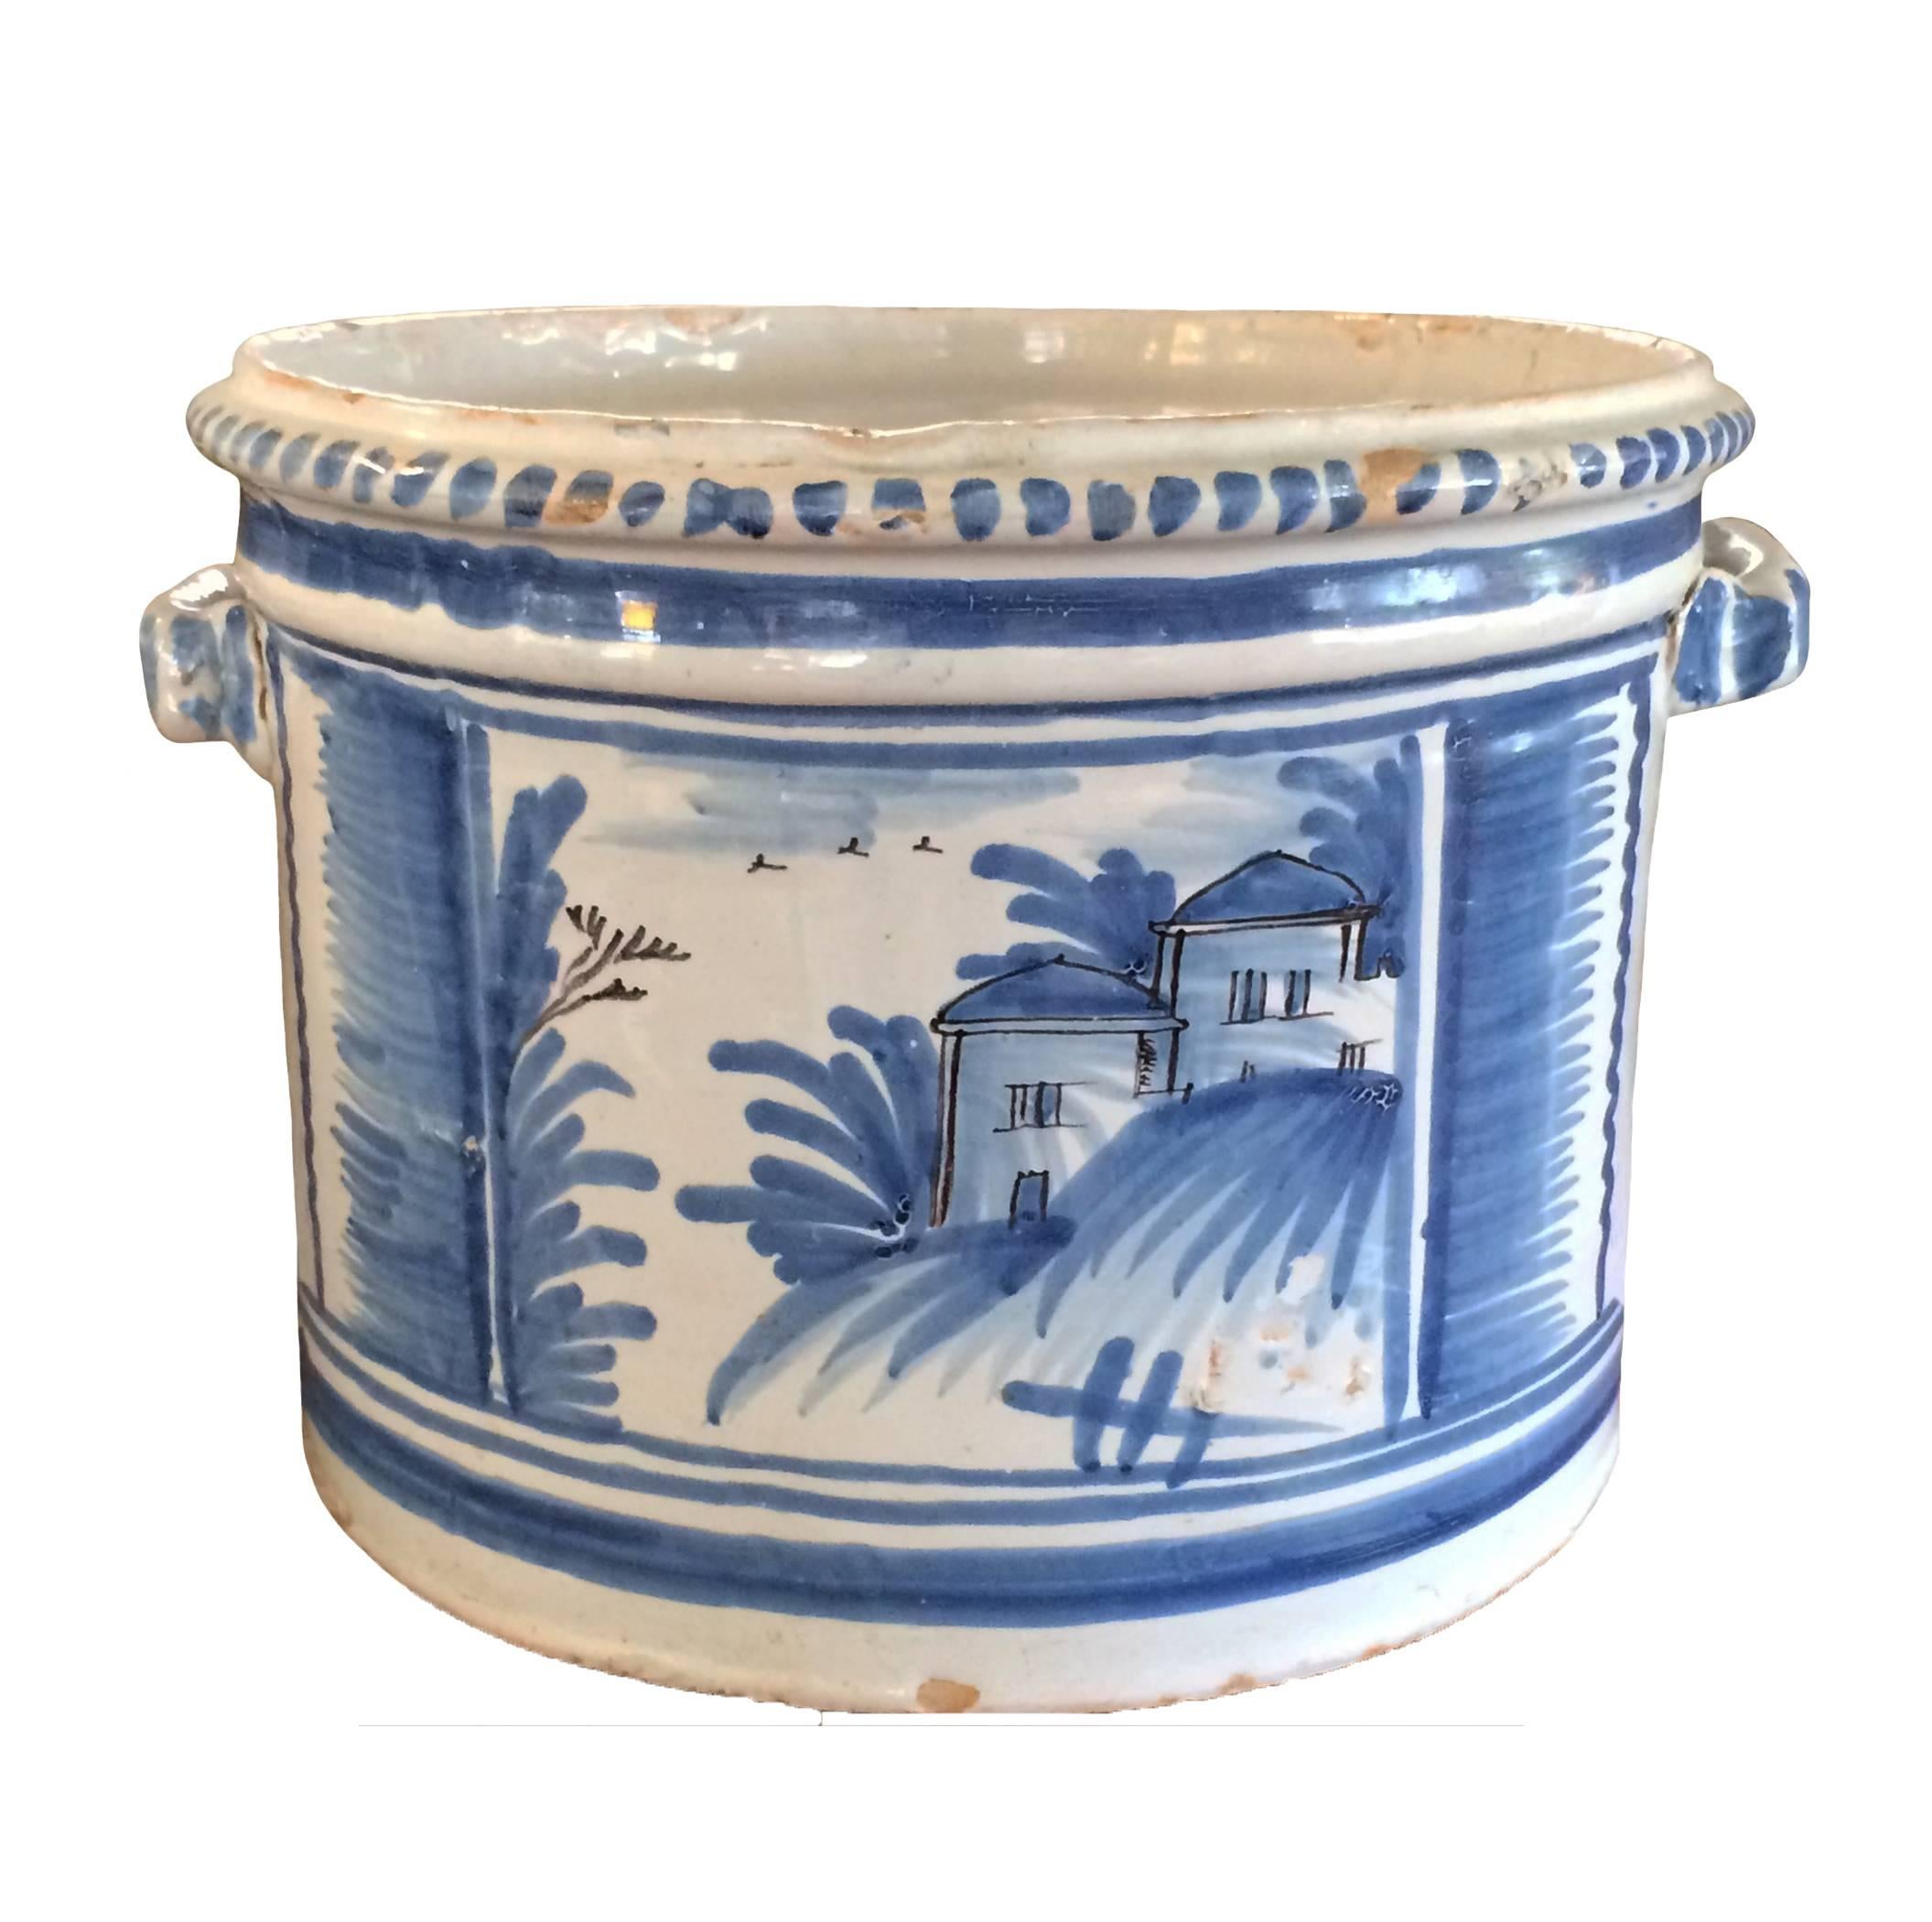 Delft blue and white jardinière with handles; varying landscape scenery depicted on each side; tulip decorated side panels; 18th century.